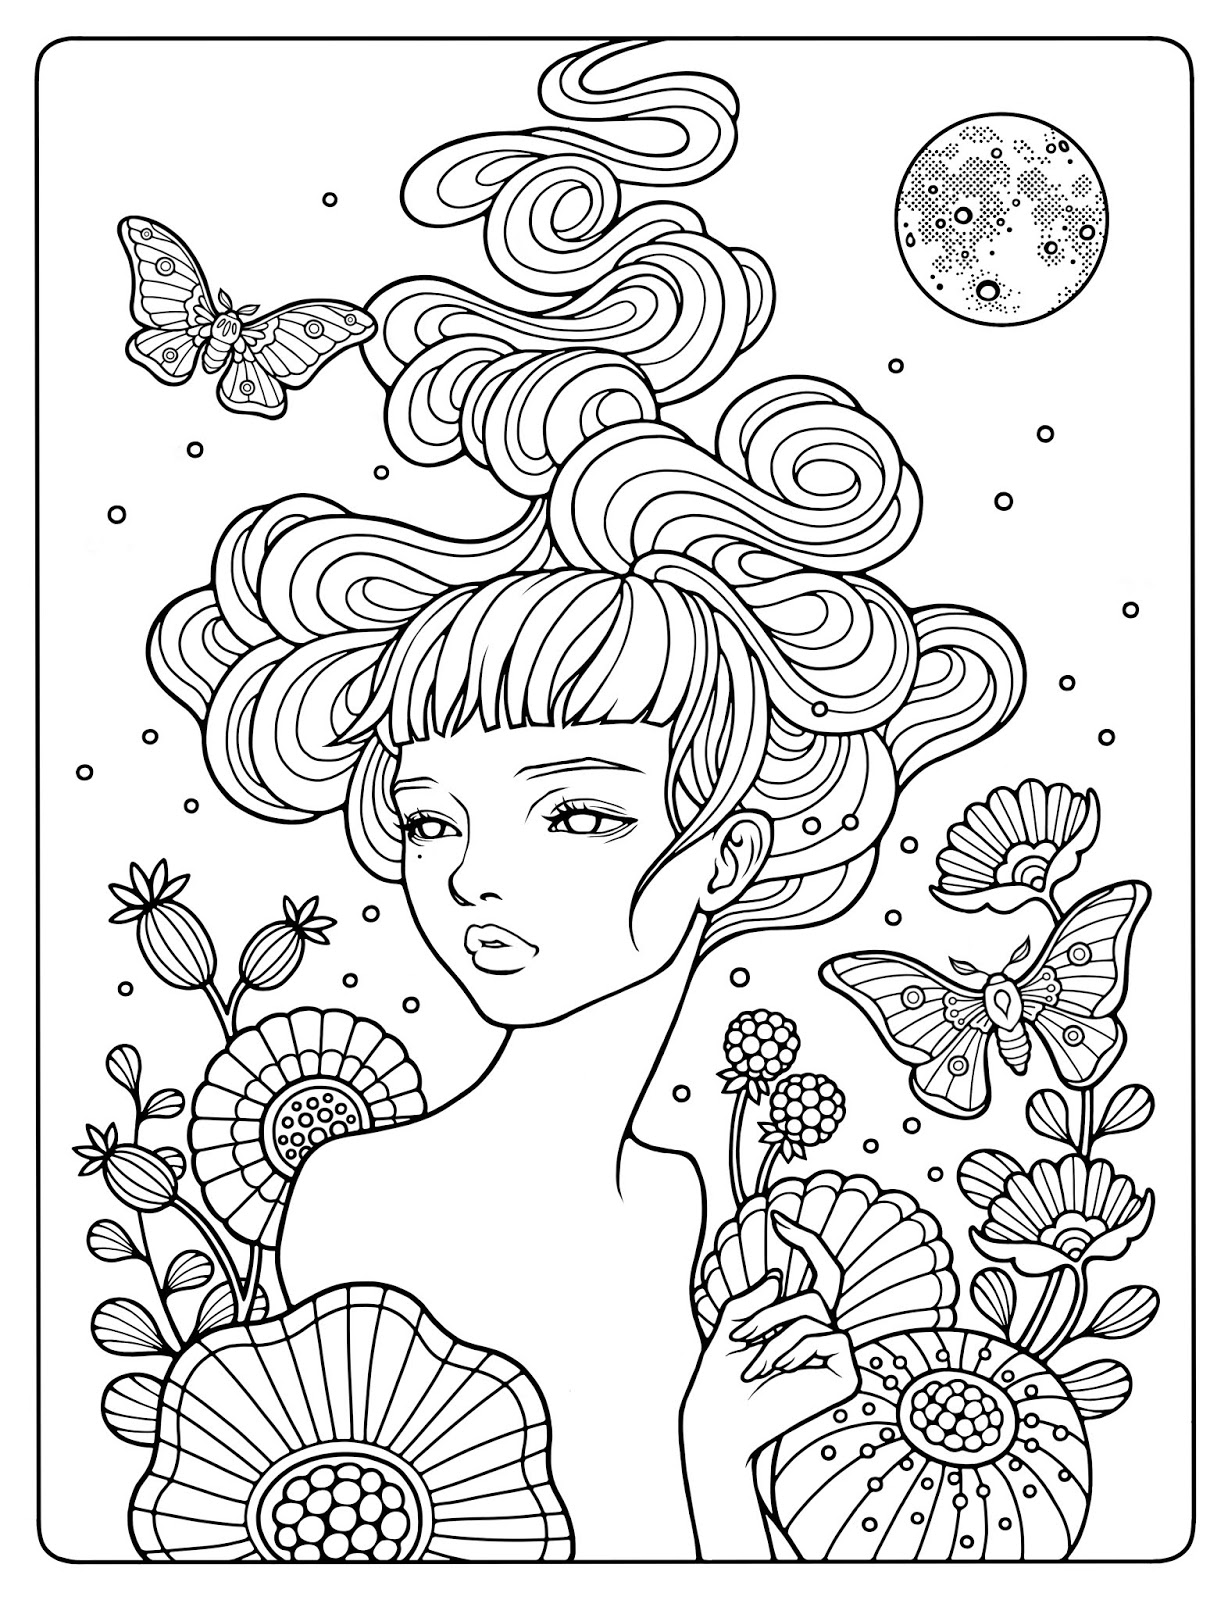 Procreate Coloring Pages Printable